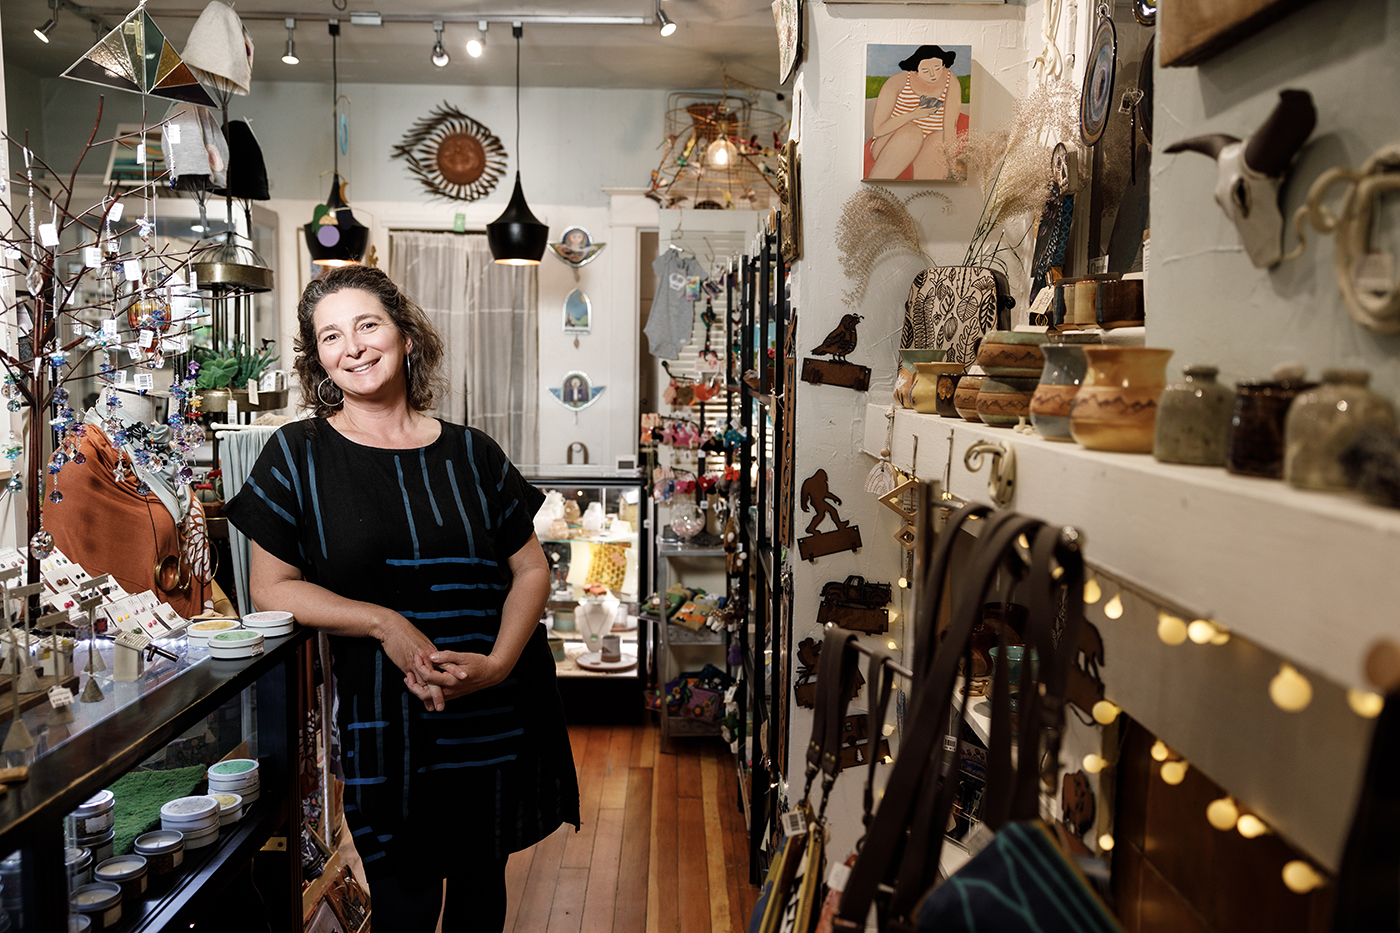 Gail Piccoli is the owner of Commerce & Craft, a shop that sells crafted work from over 70 artists both local and national.